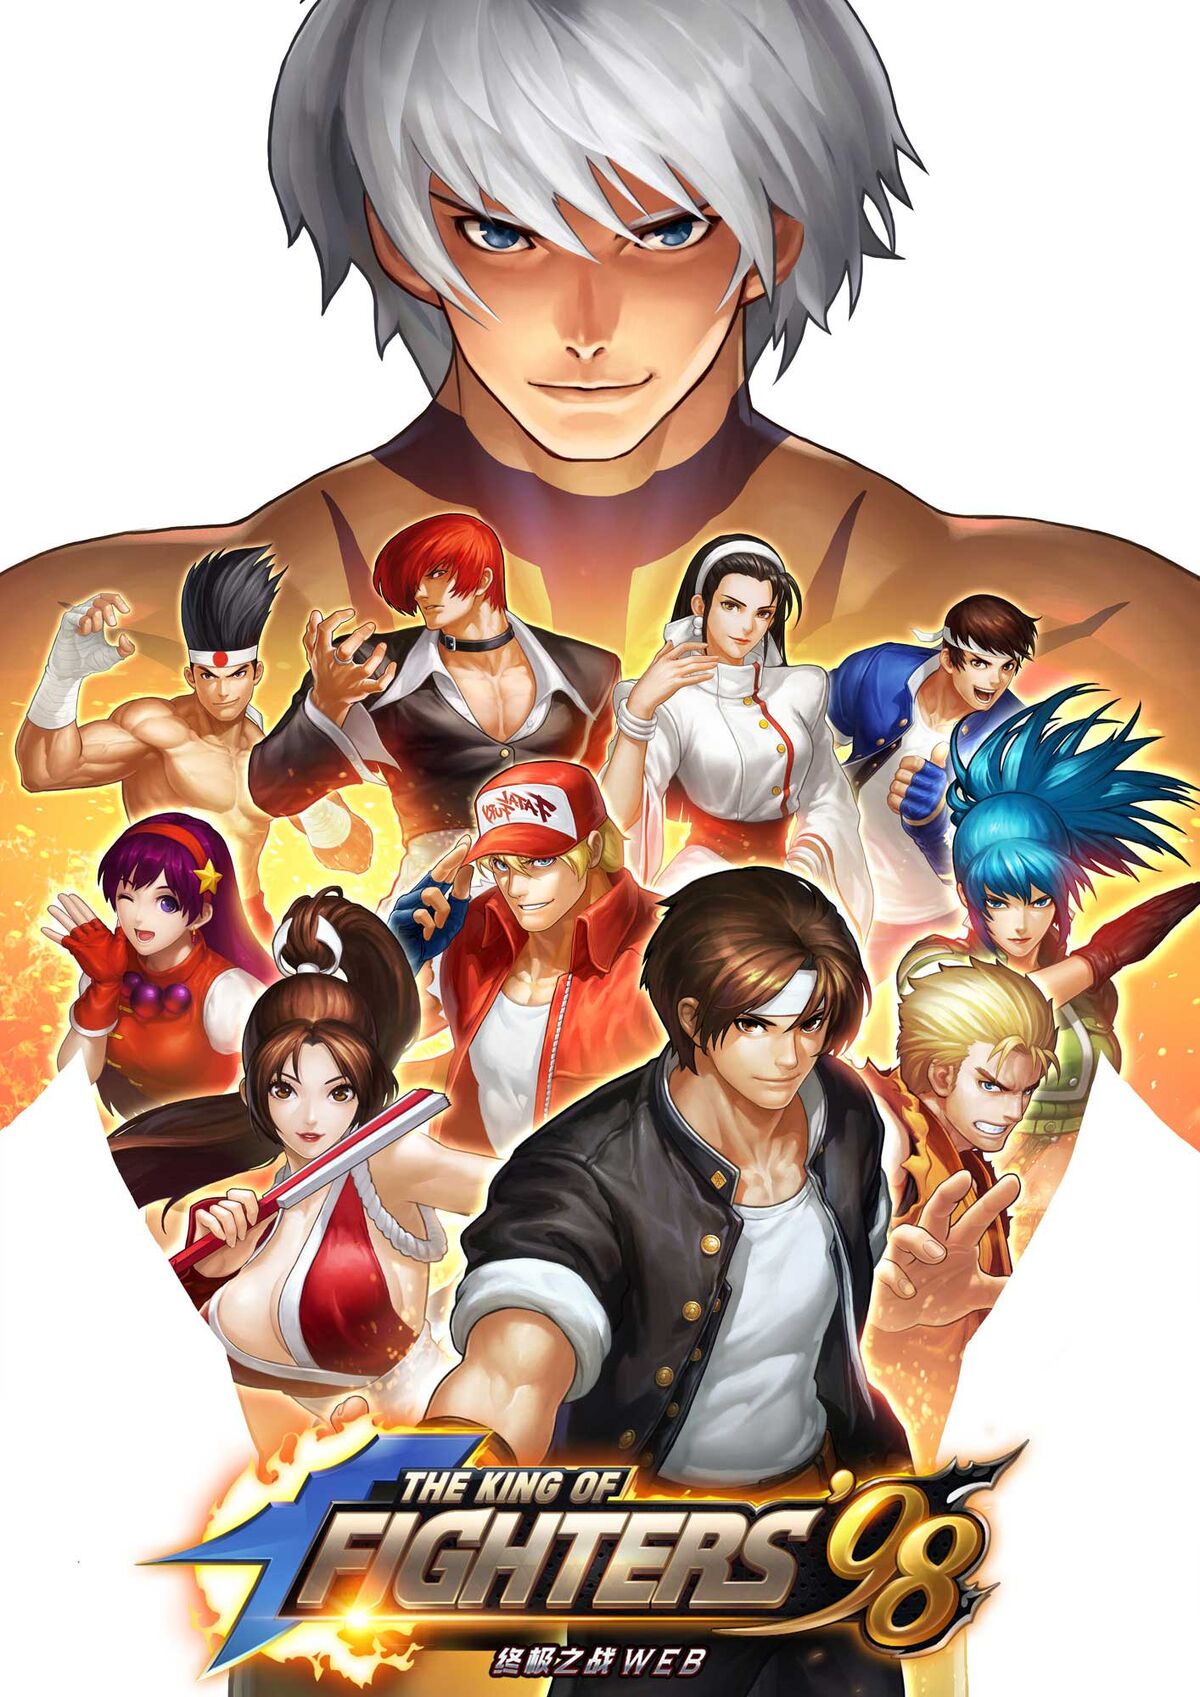 The King of Fighters '98: Ultimate Match HERO (China V100 09-08-23) : IGS -  SNK Playmore - New Channel : Free Borrow & Streaming : Internet Archive